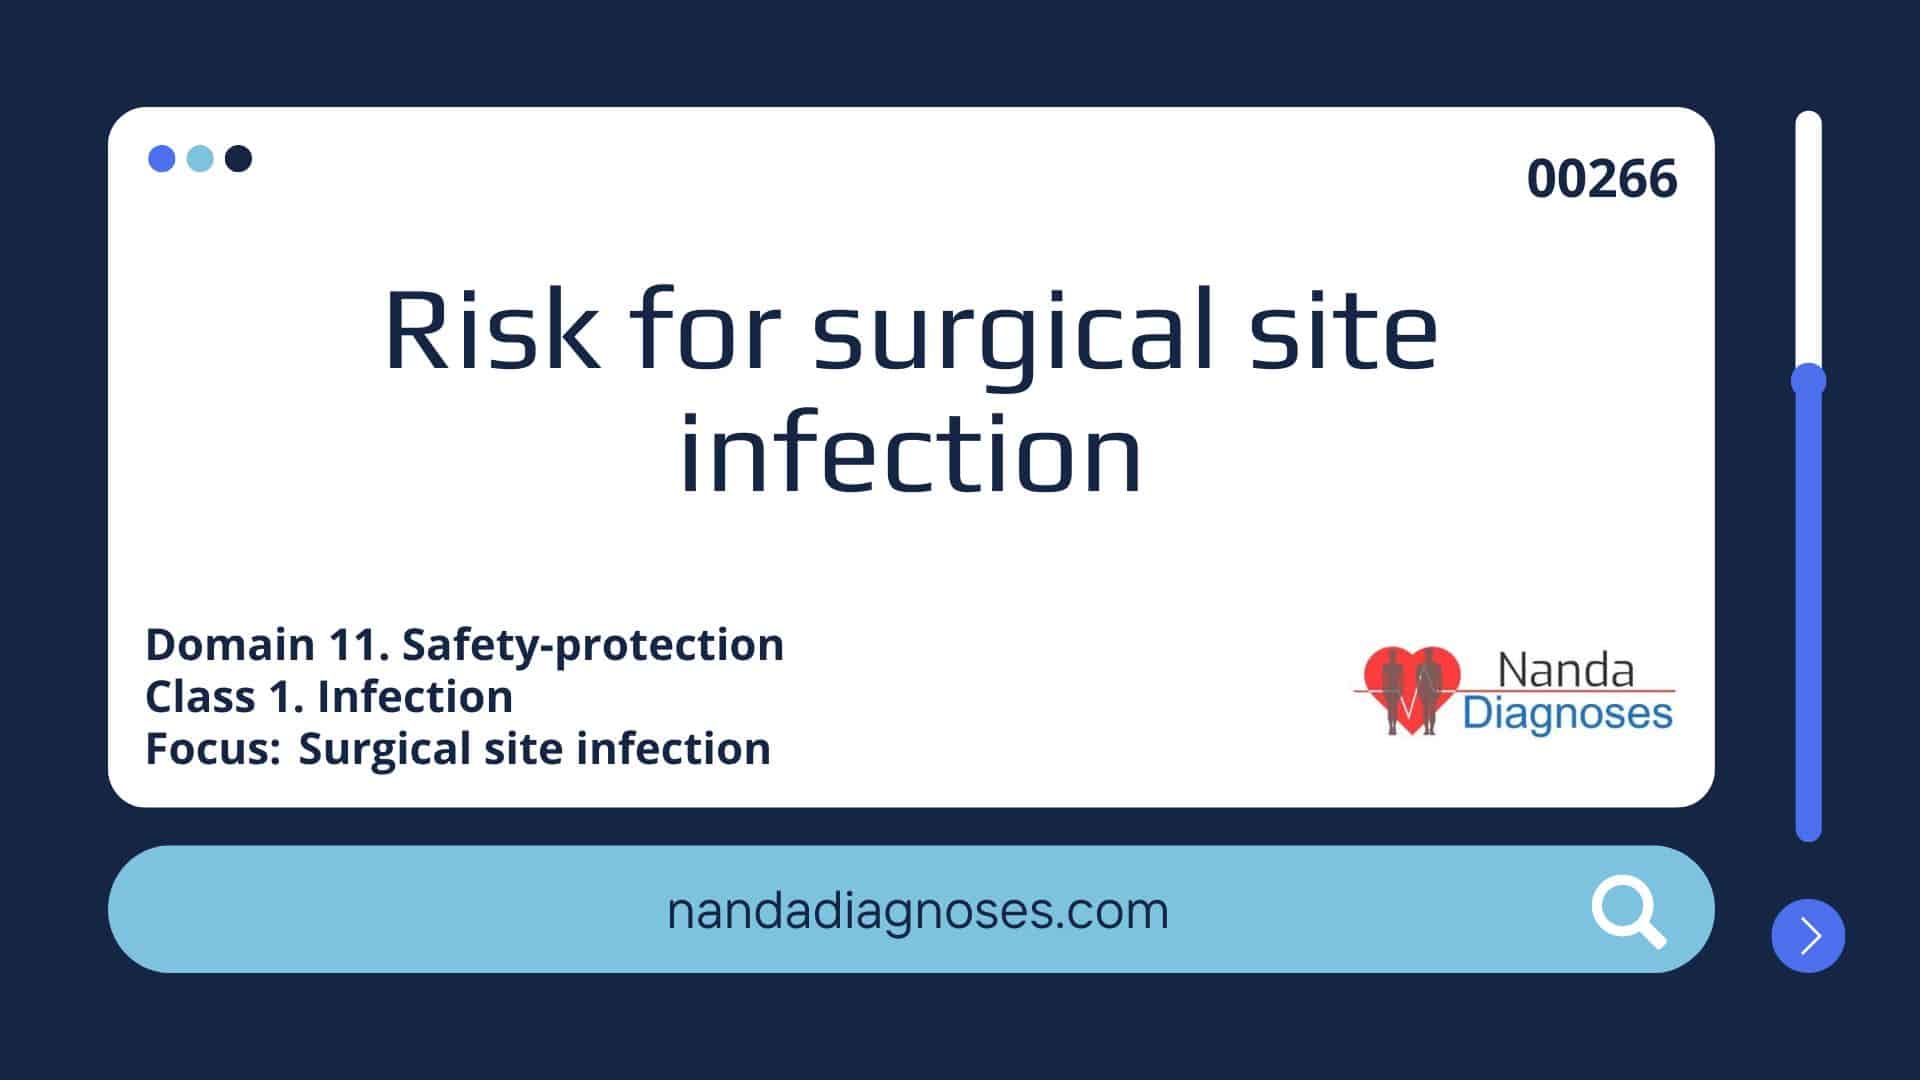 Nursing diagnosis Risk for surgical site infection